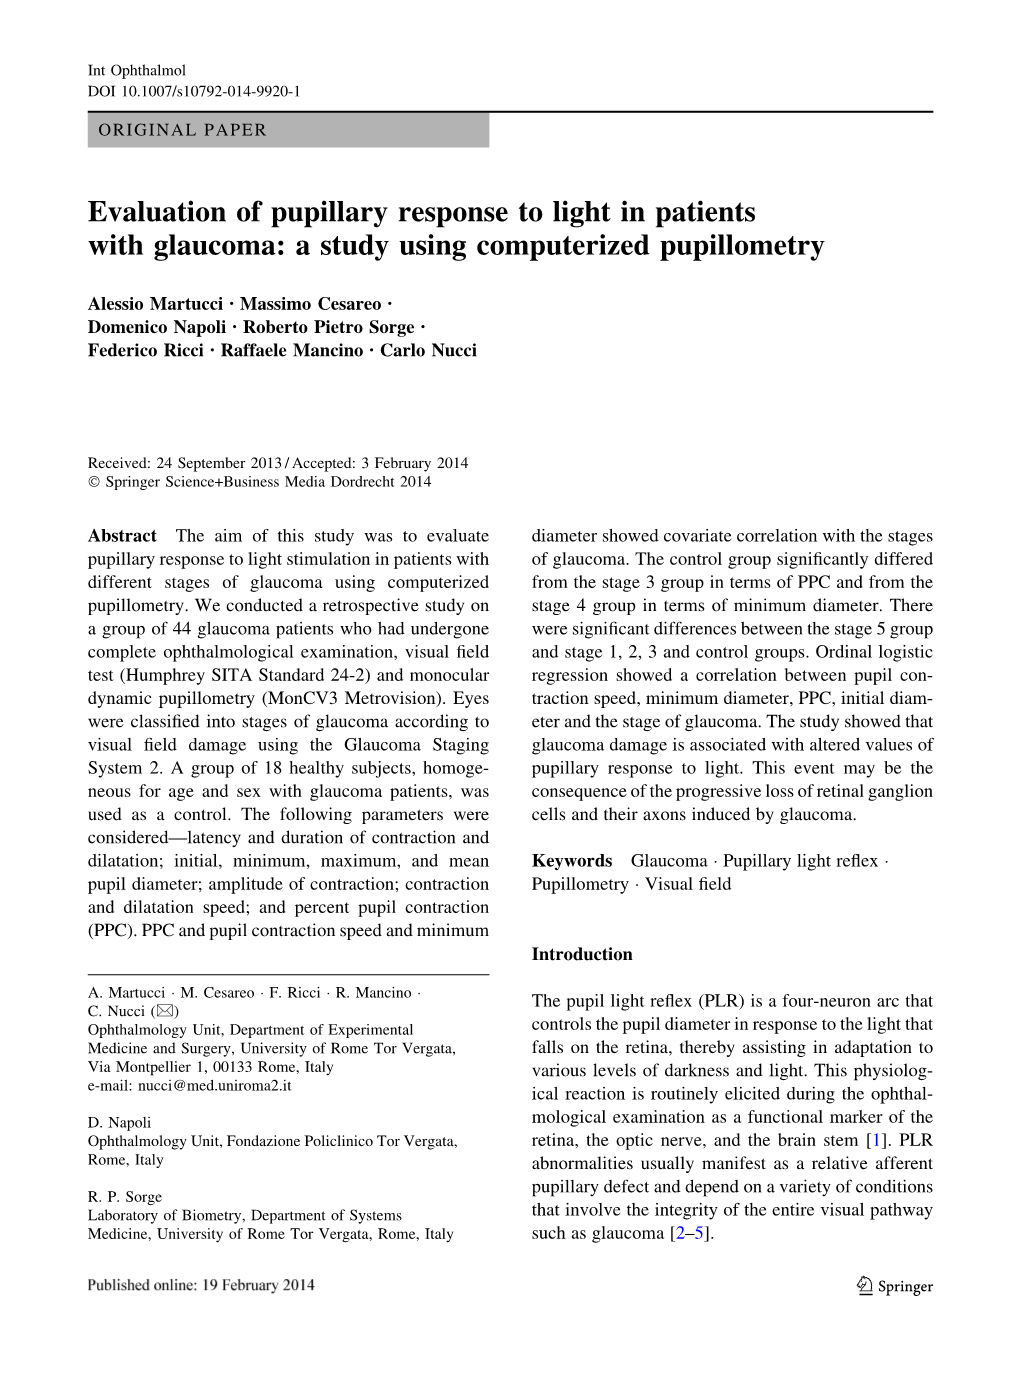 Evaluation of Pupillary Response to Light in Patients with Glaucoma: a Study Using Computerized Pupillometry